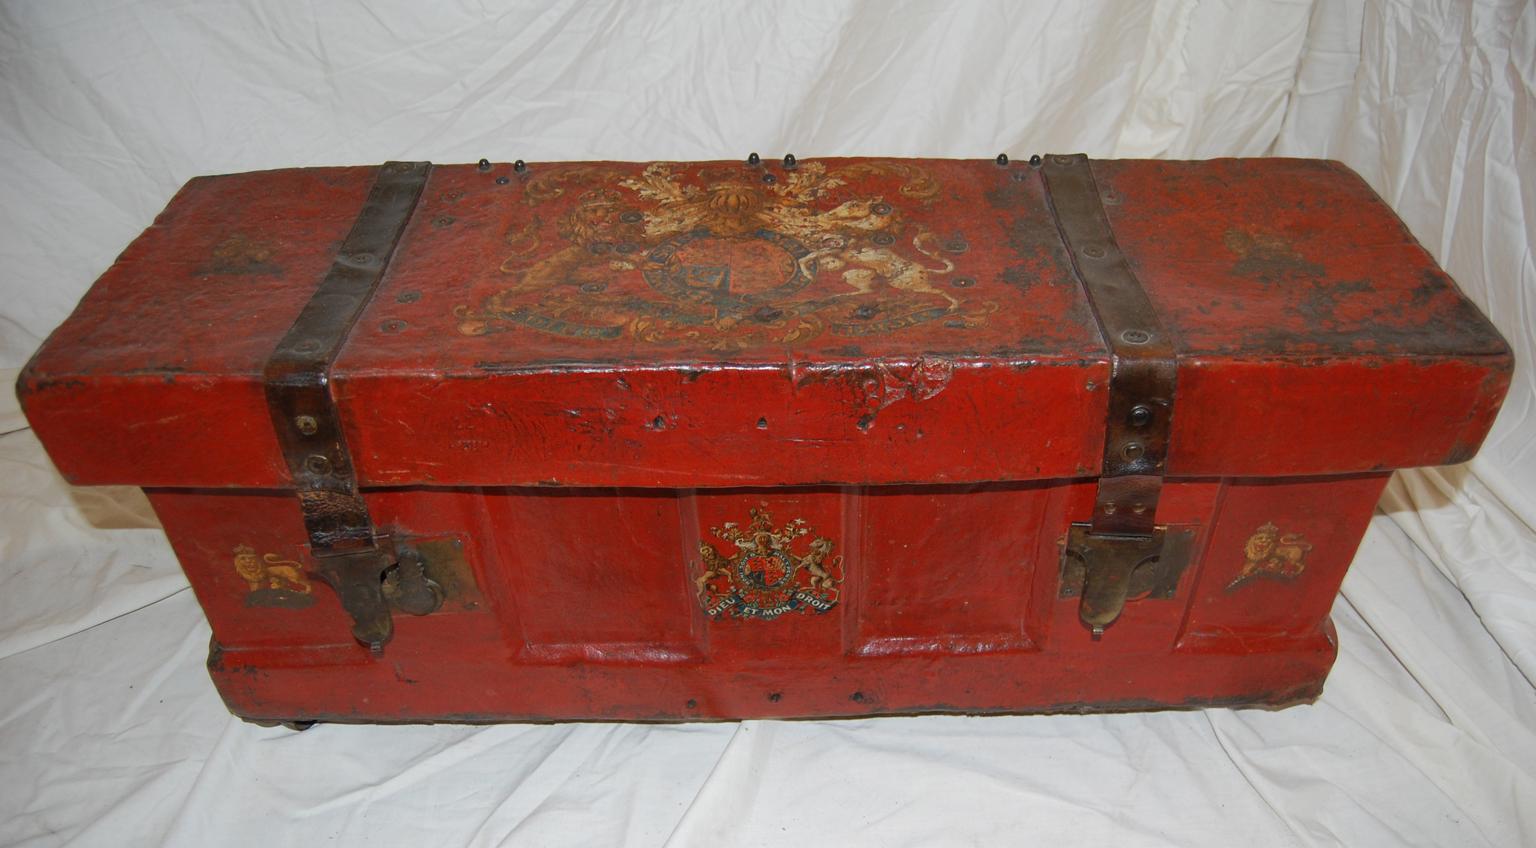 Brass English Mid-19th Century Military Munitions Box with Royal Mottos, Coat of Arms For Sale